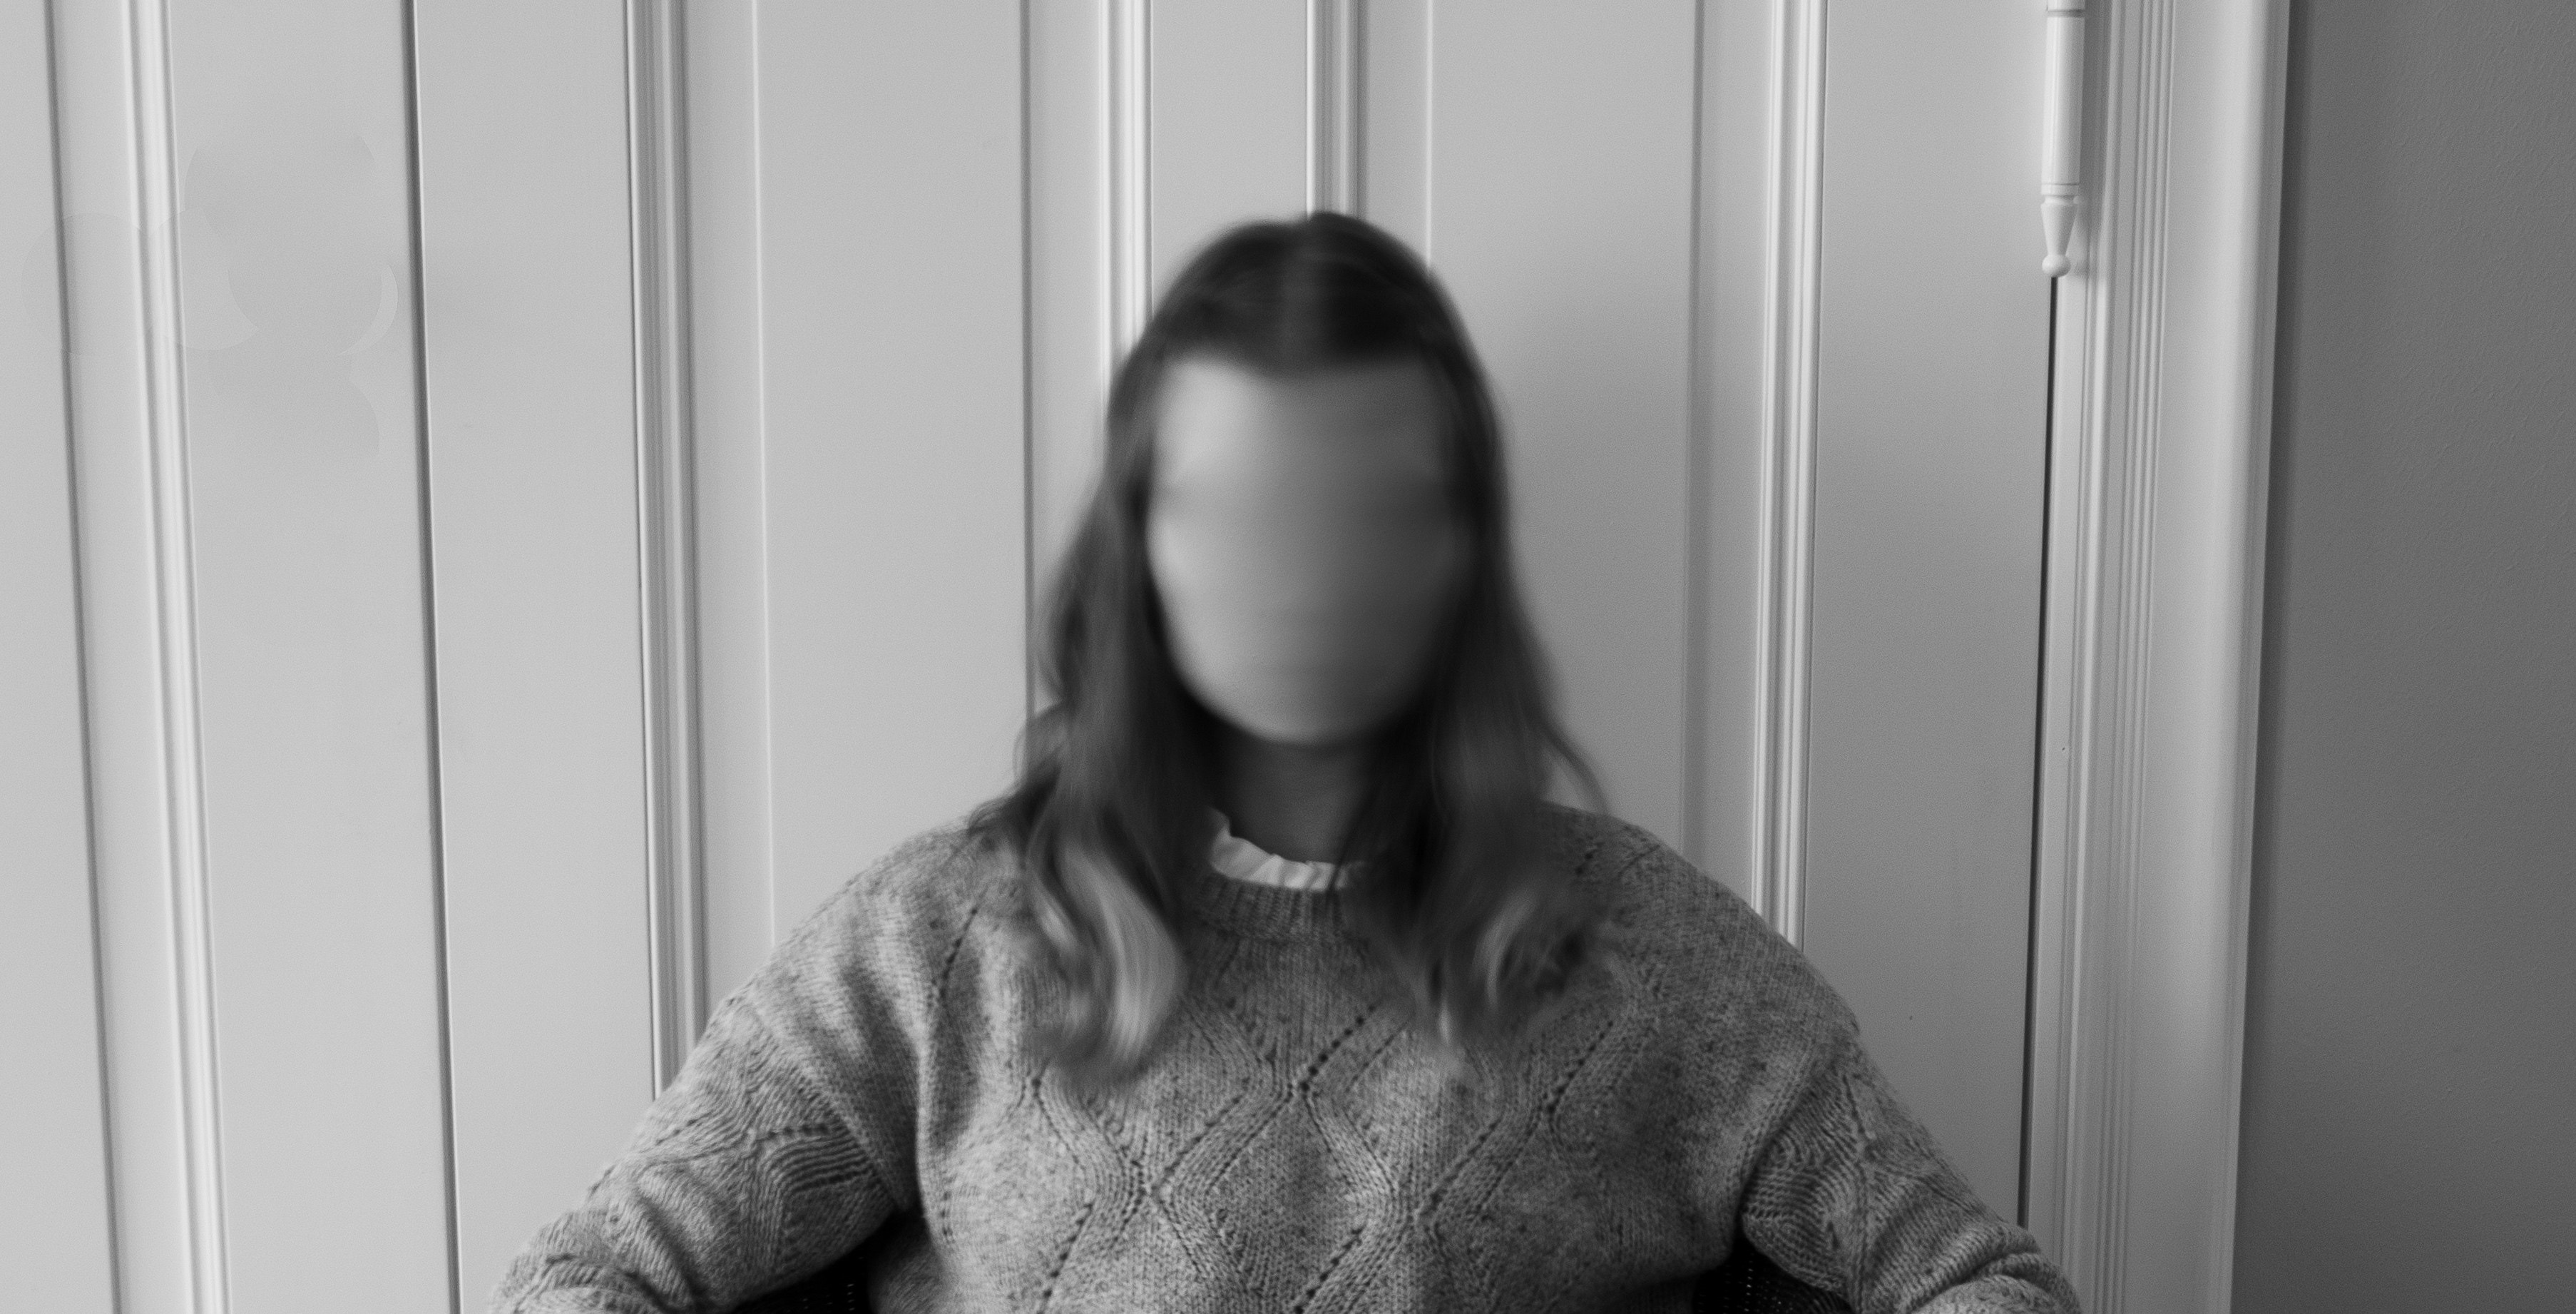 Black and white image of a woman with her face blurred